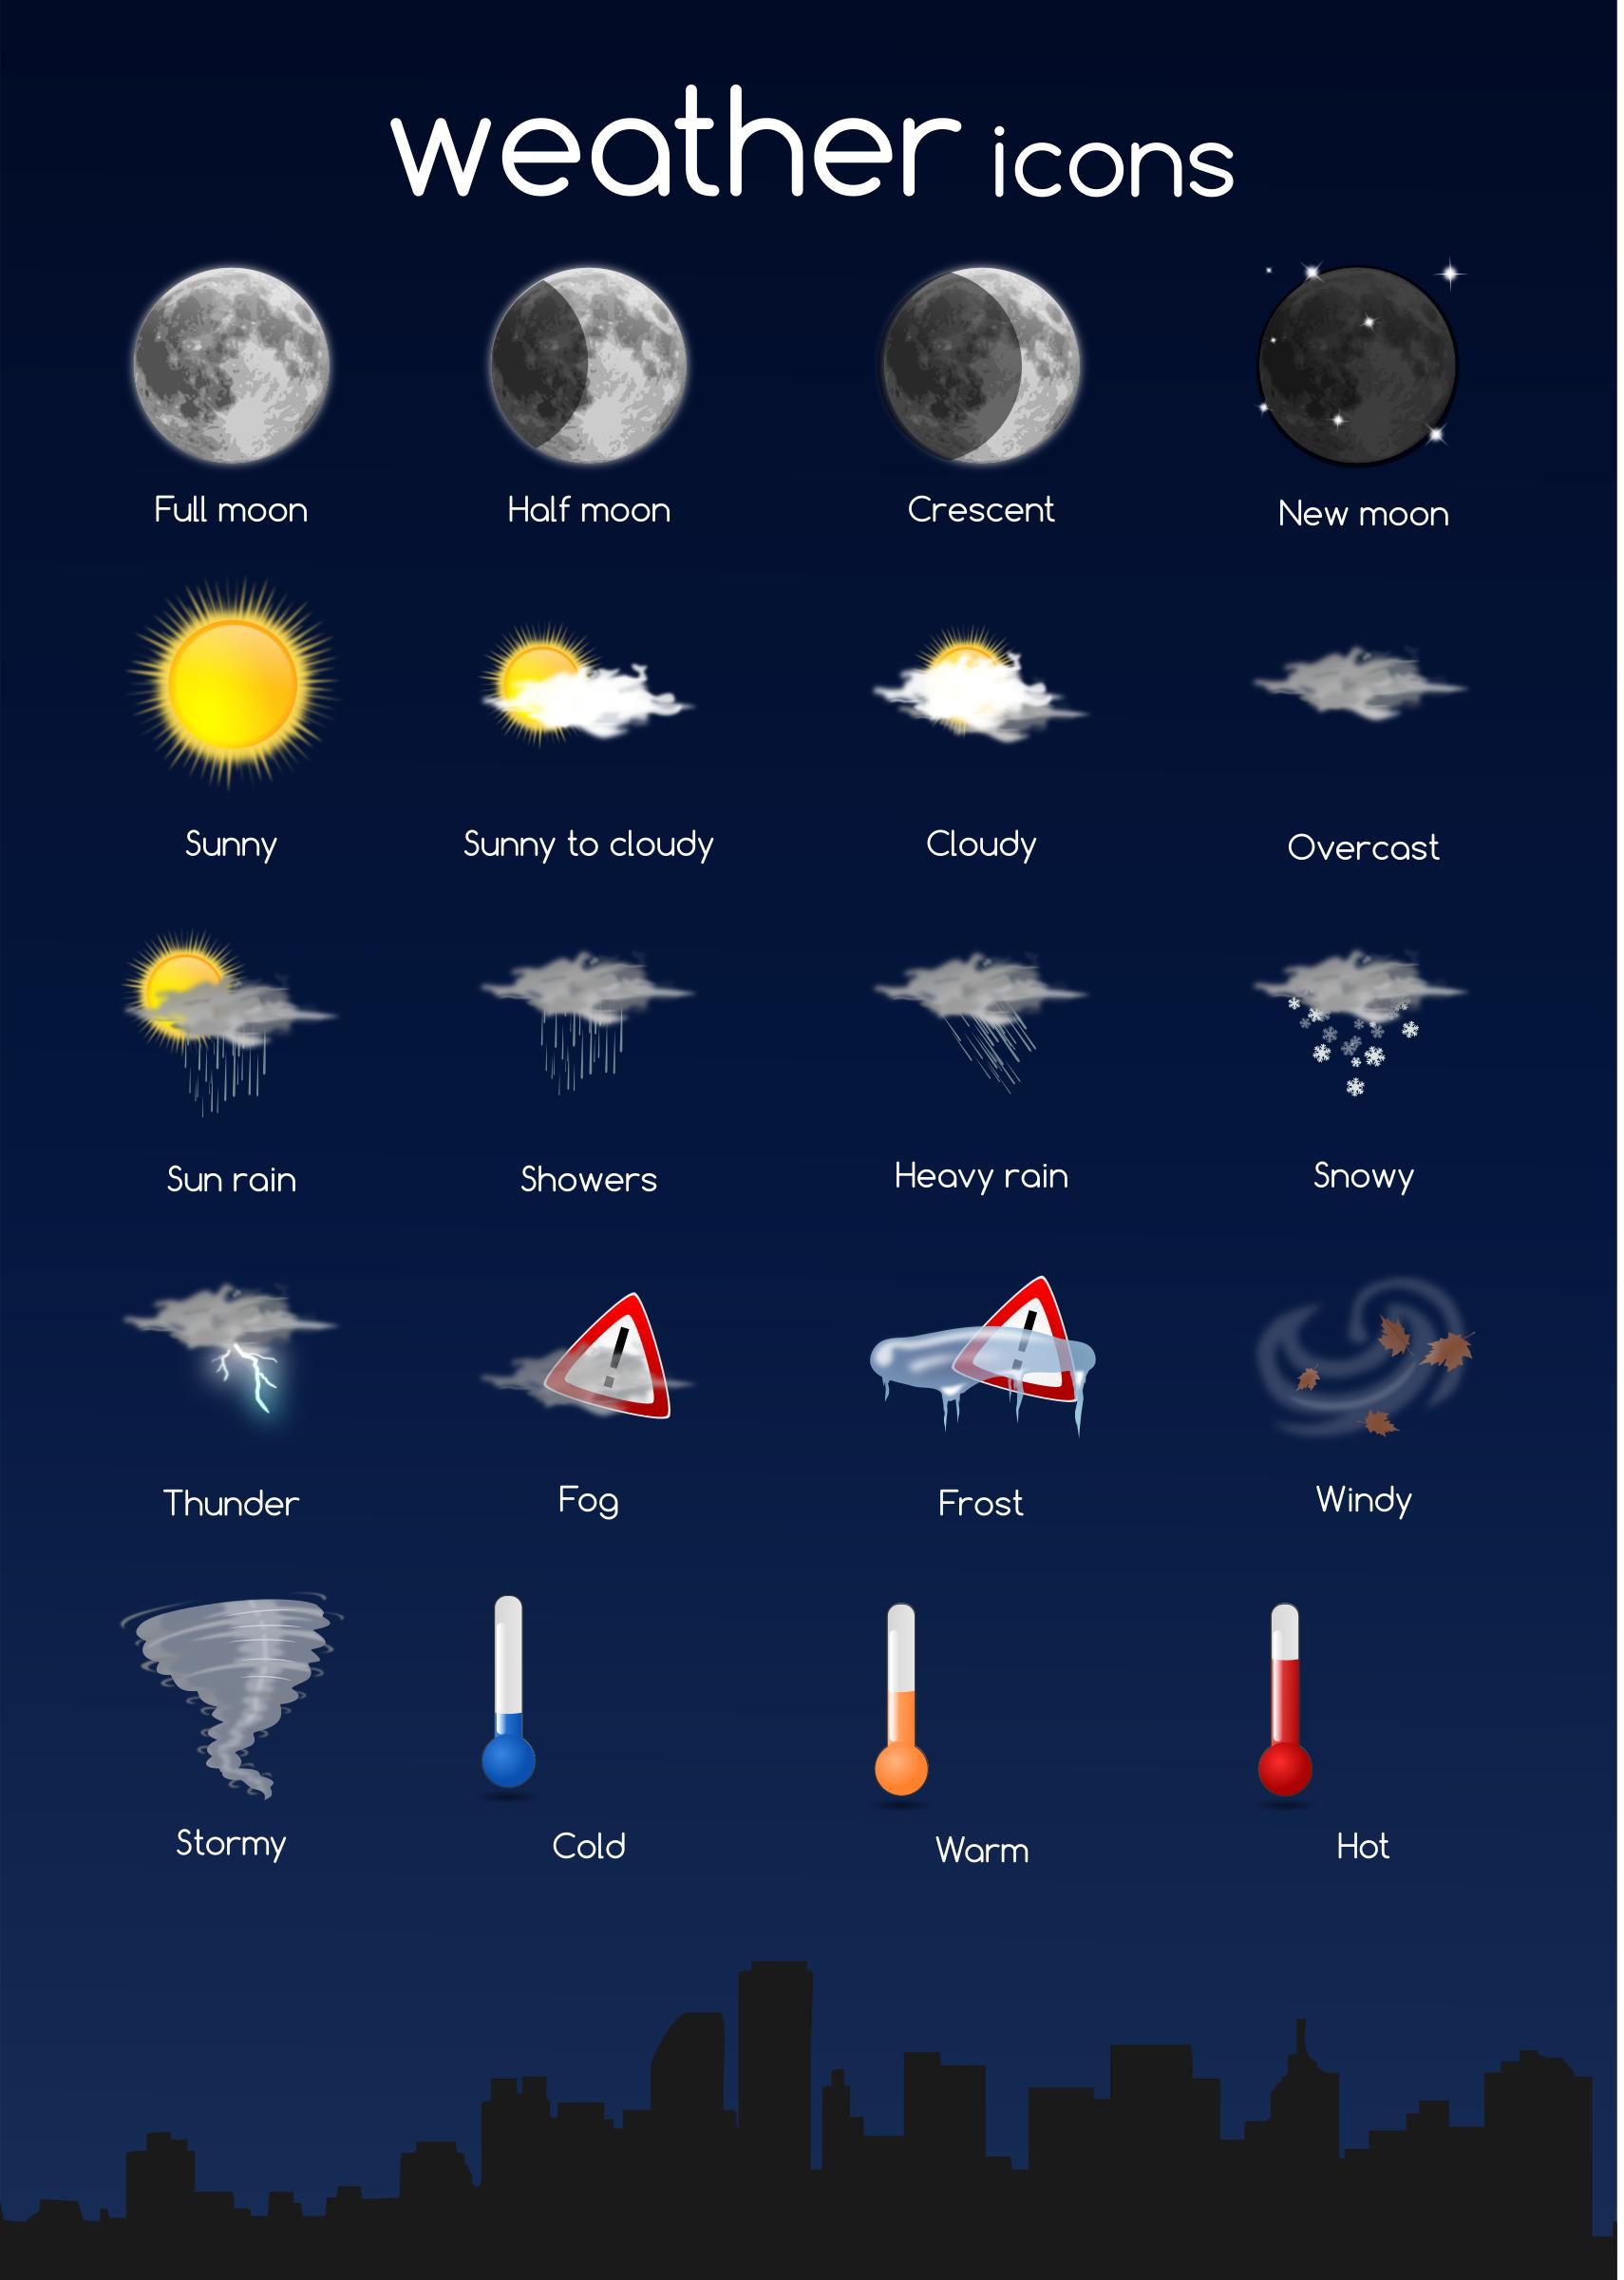 weather icon - complete set PNG icons